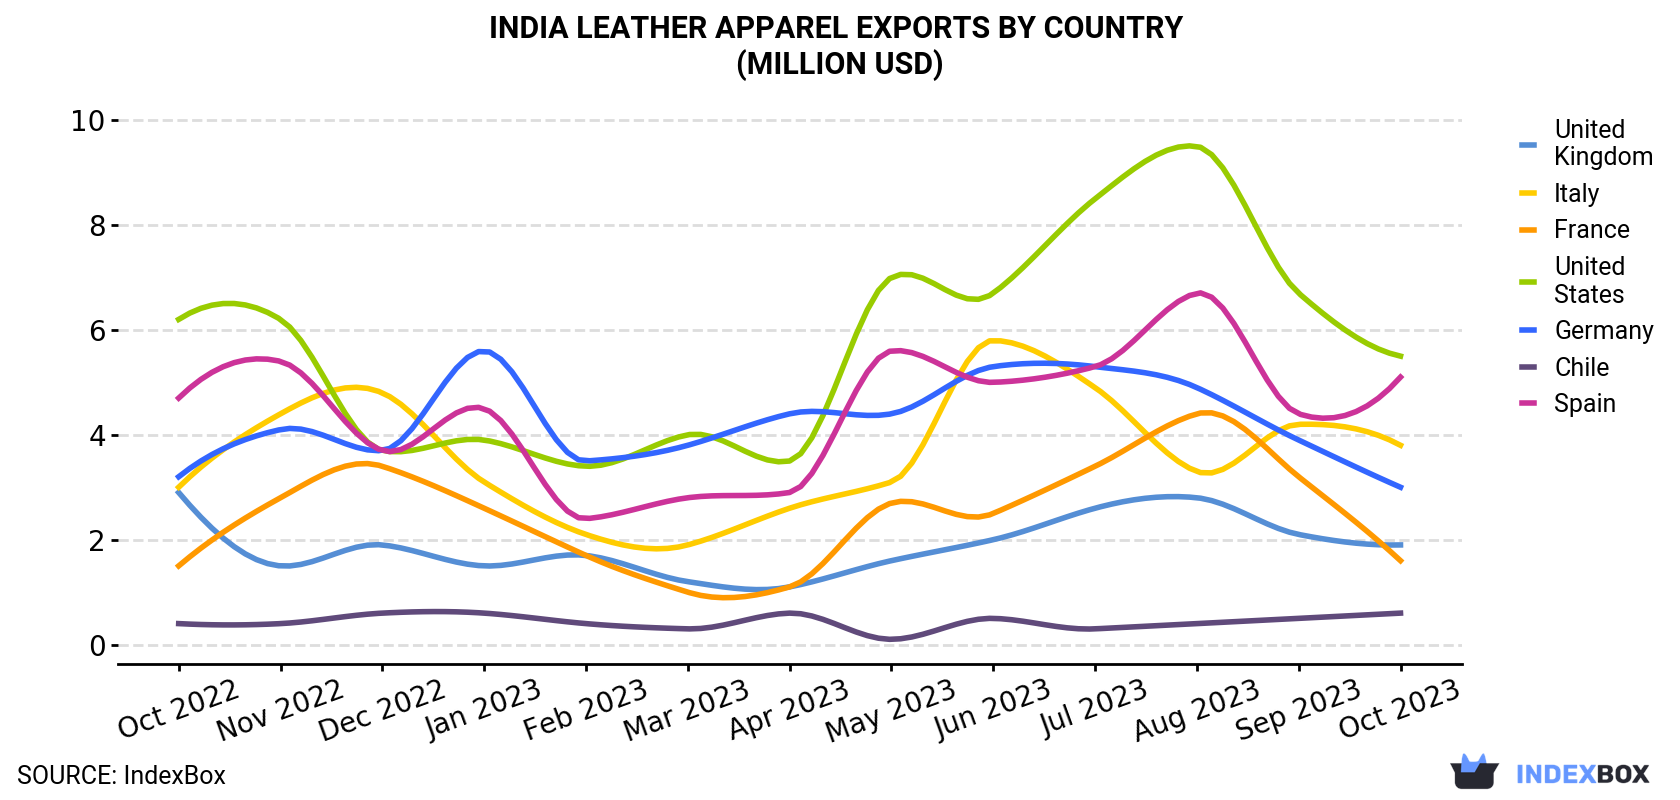 India Leather Apparel Exports By Country (Million USD)